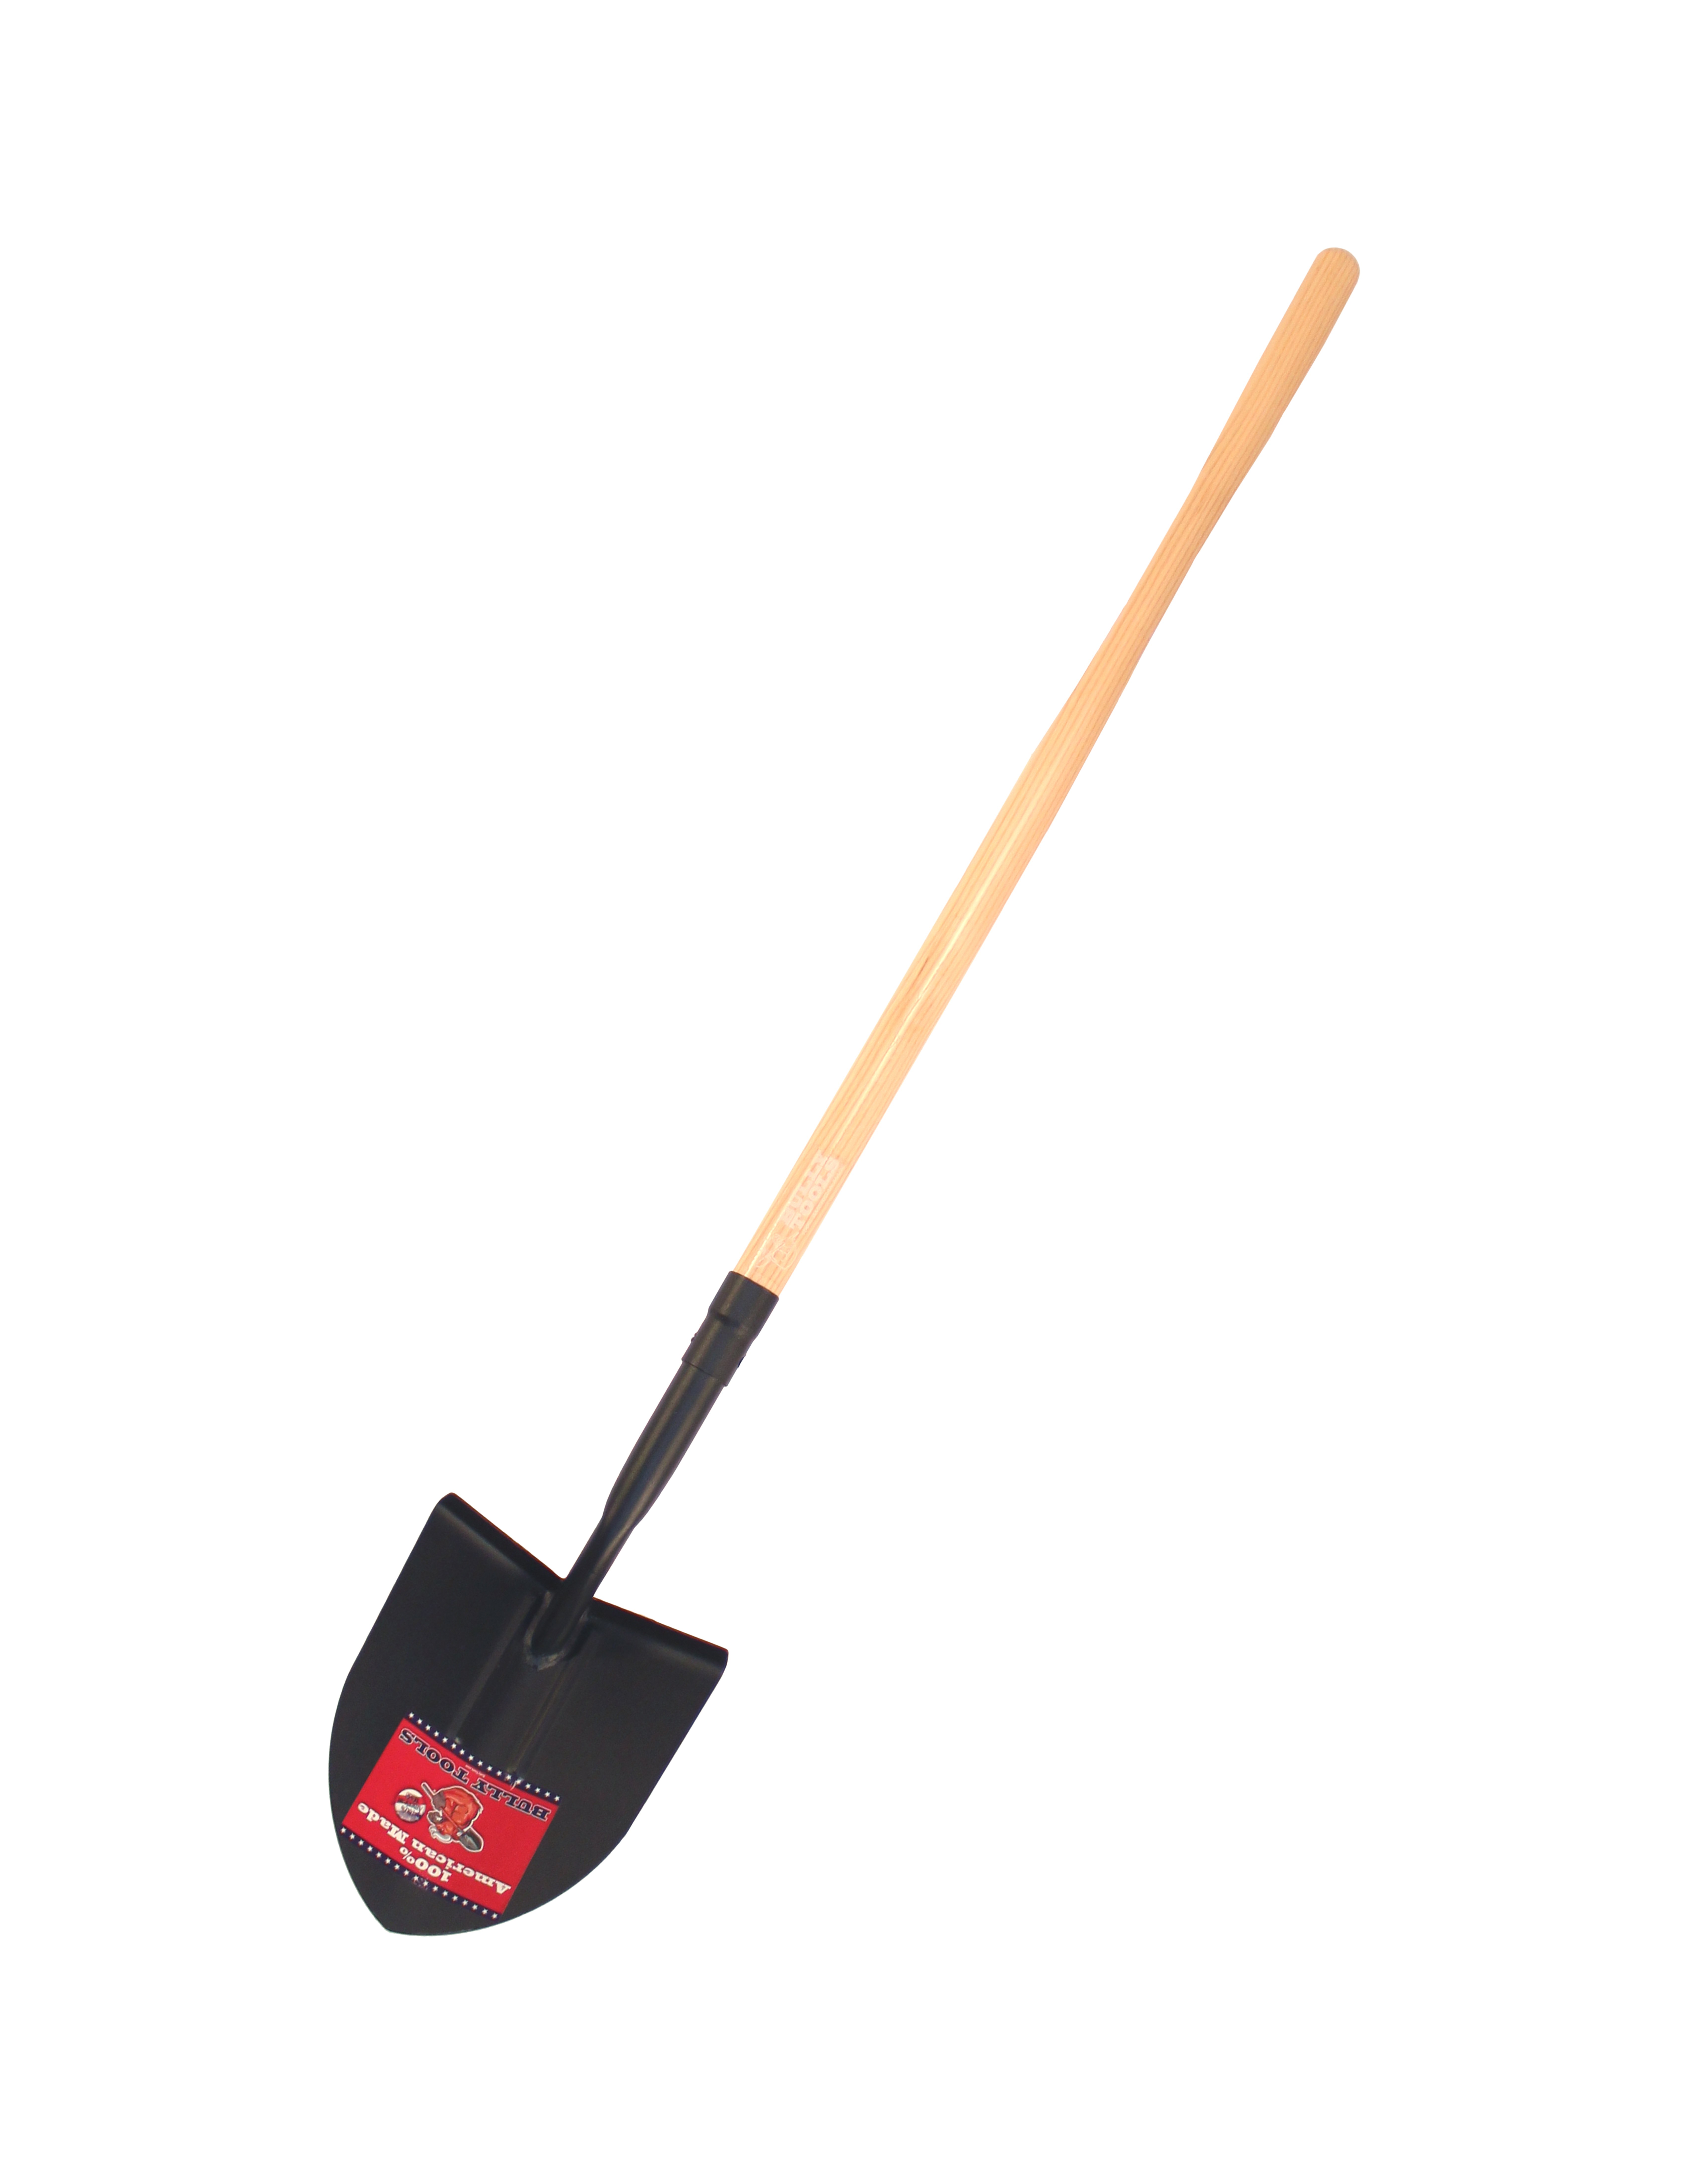 Bully Tools 14-Gauge Round Point Shovel American Ash Long Handle - 72515